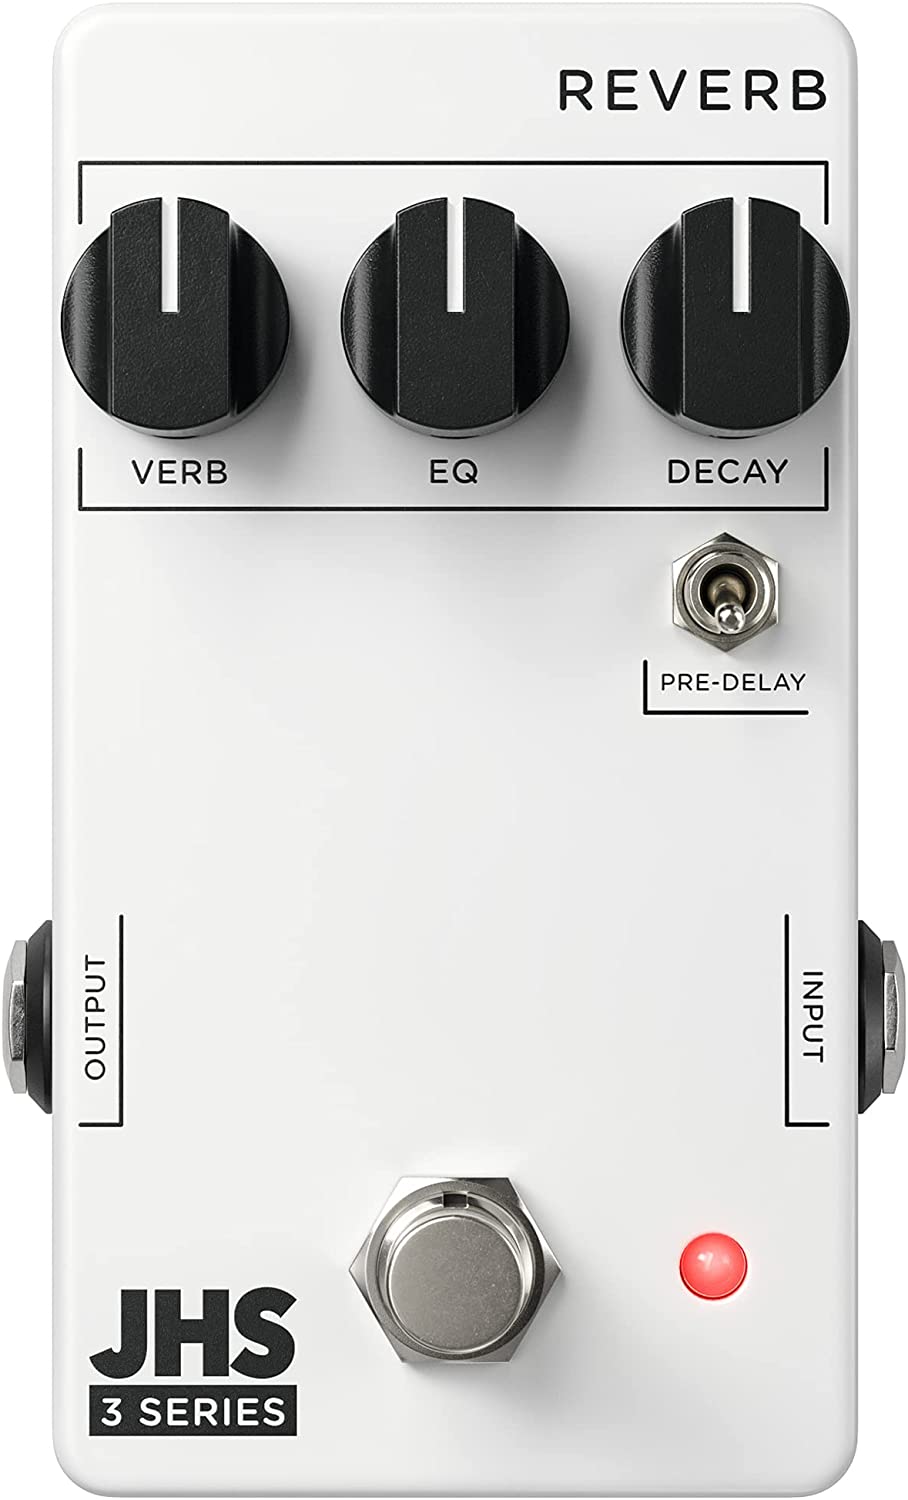 JHS Pedals 3 Series Reverb Pedal on a white background